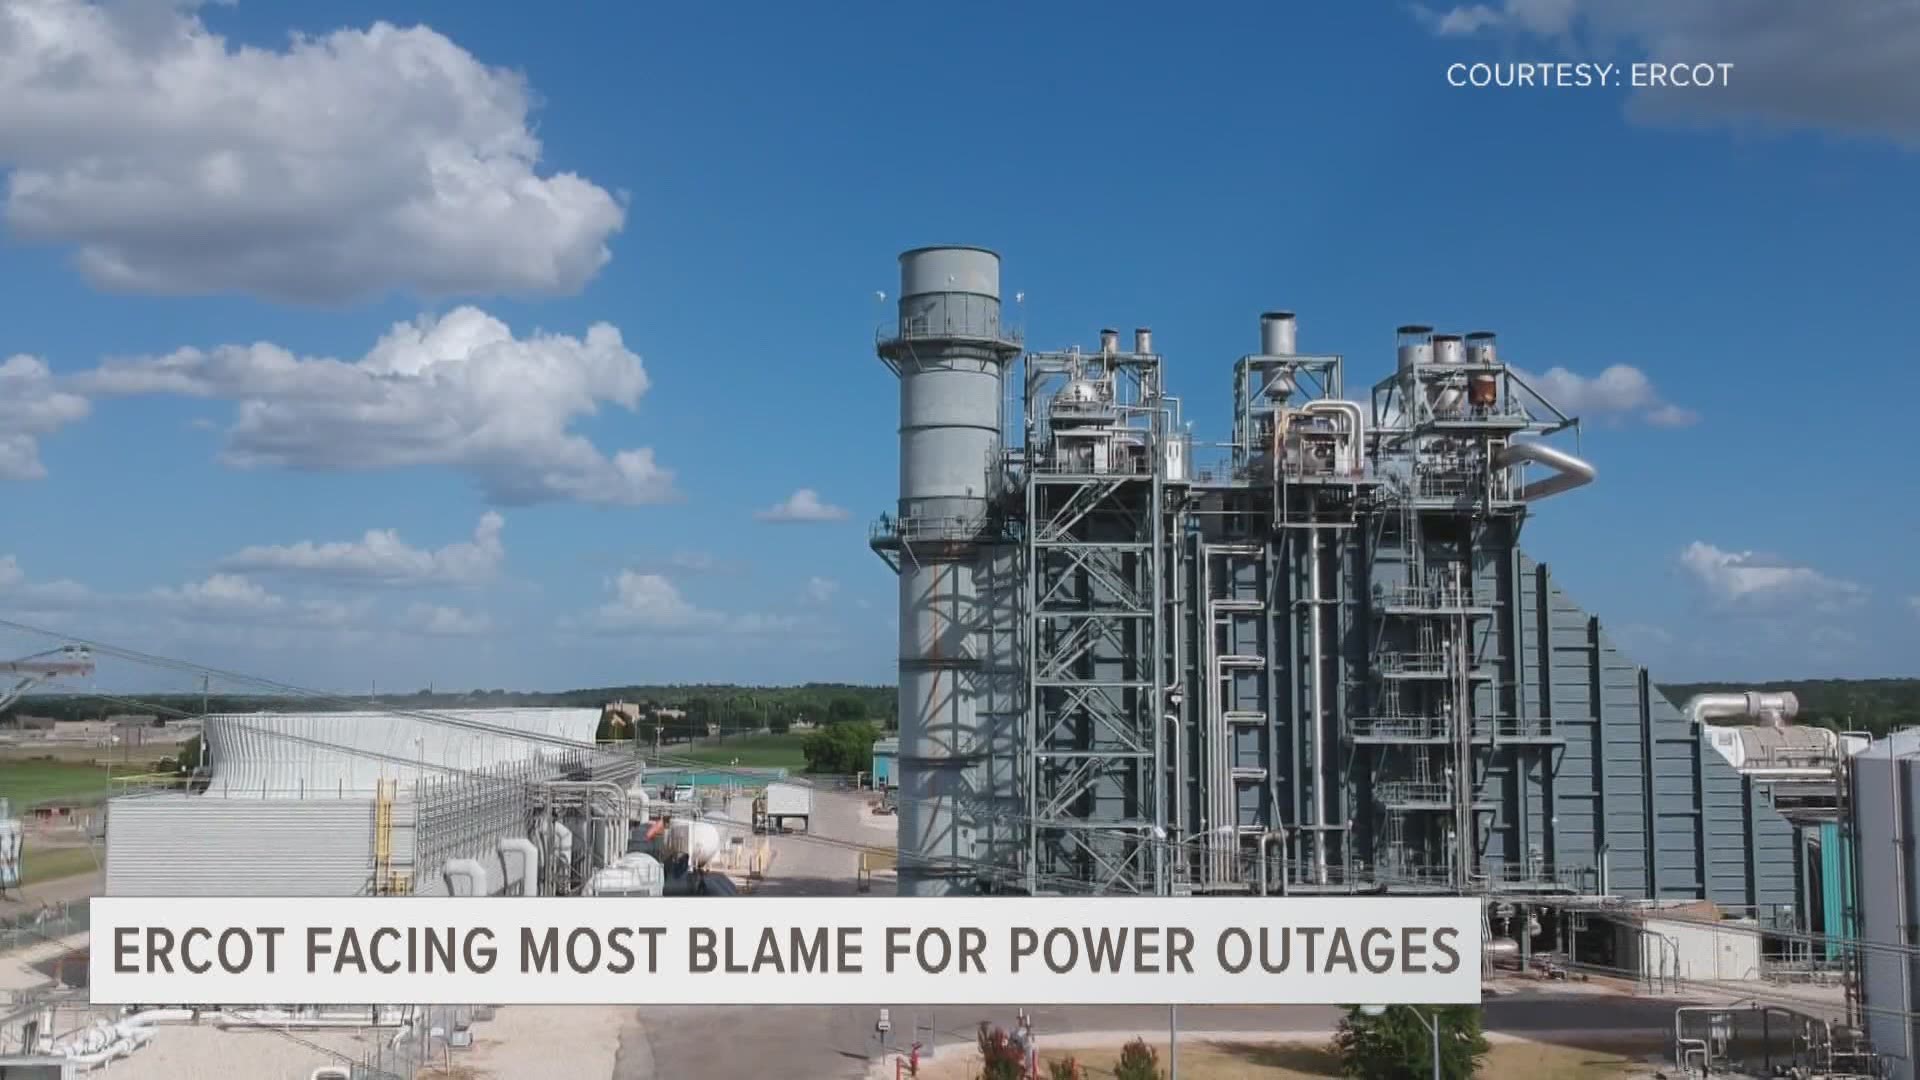 During a special board meeting, ERCOT's CEO and board members discuss the failure of Texas's power grid and efforts to control outages